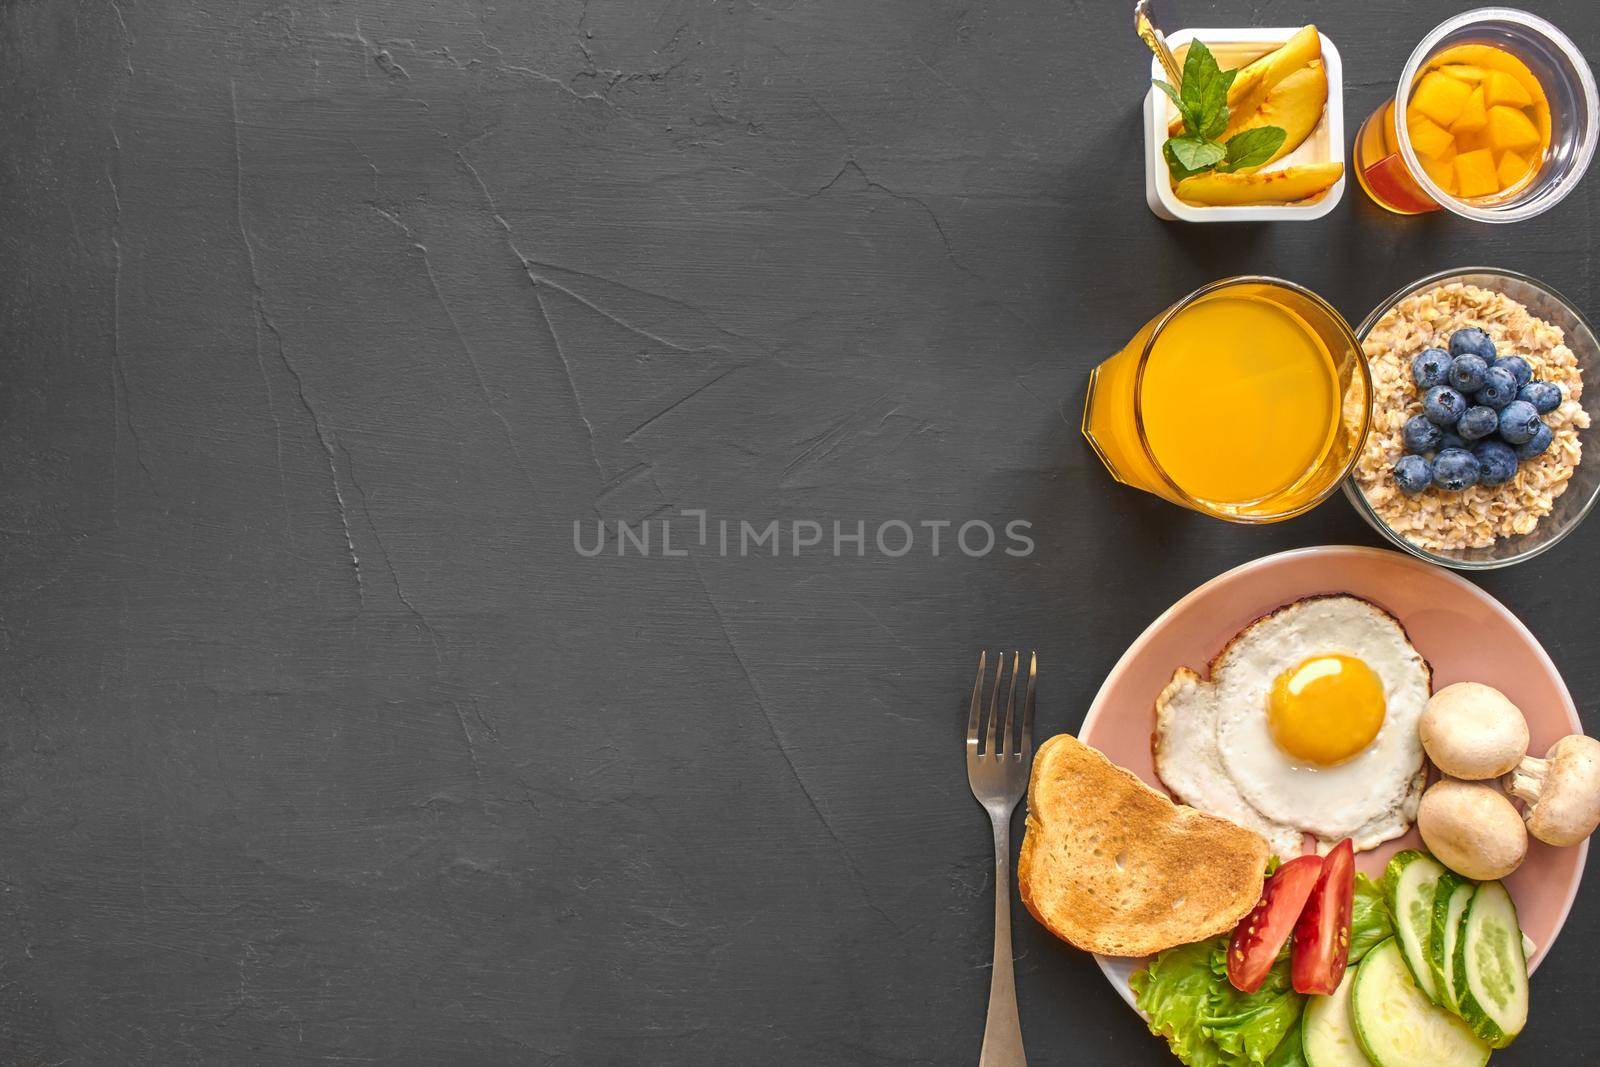 Top view of healthy and delicious breakfast on a black background with copy space. Fresh vegetables, scrambled eggs, toast are on a plate for tasty and nutritious meal. Oat flakes with a blueberry, yoghurt, orange juice and fork are nearby.